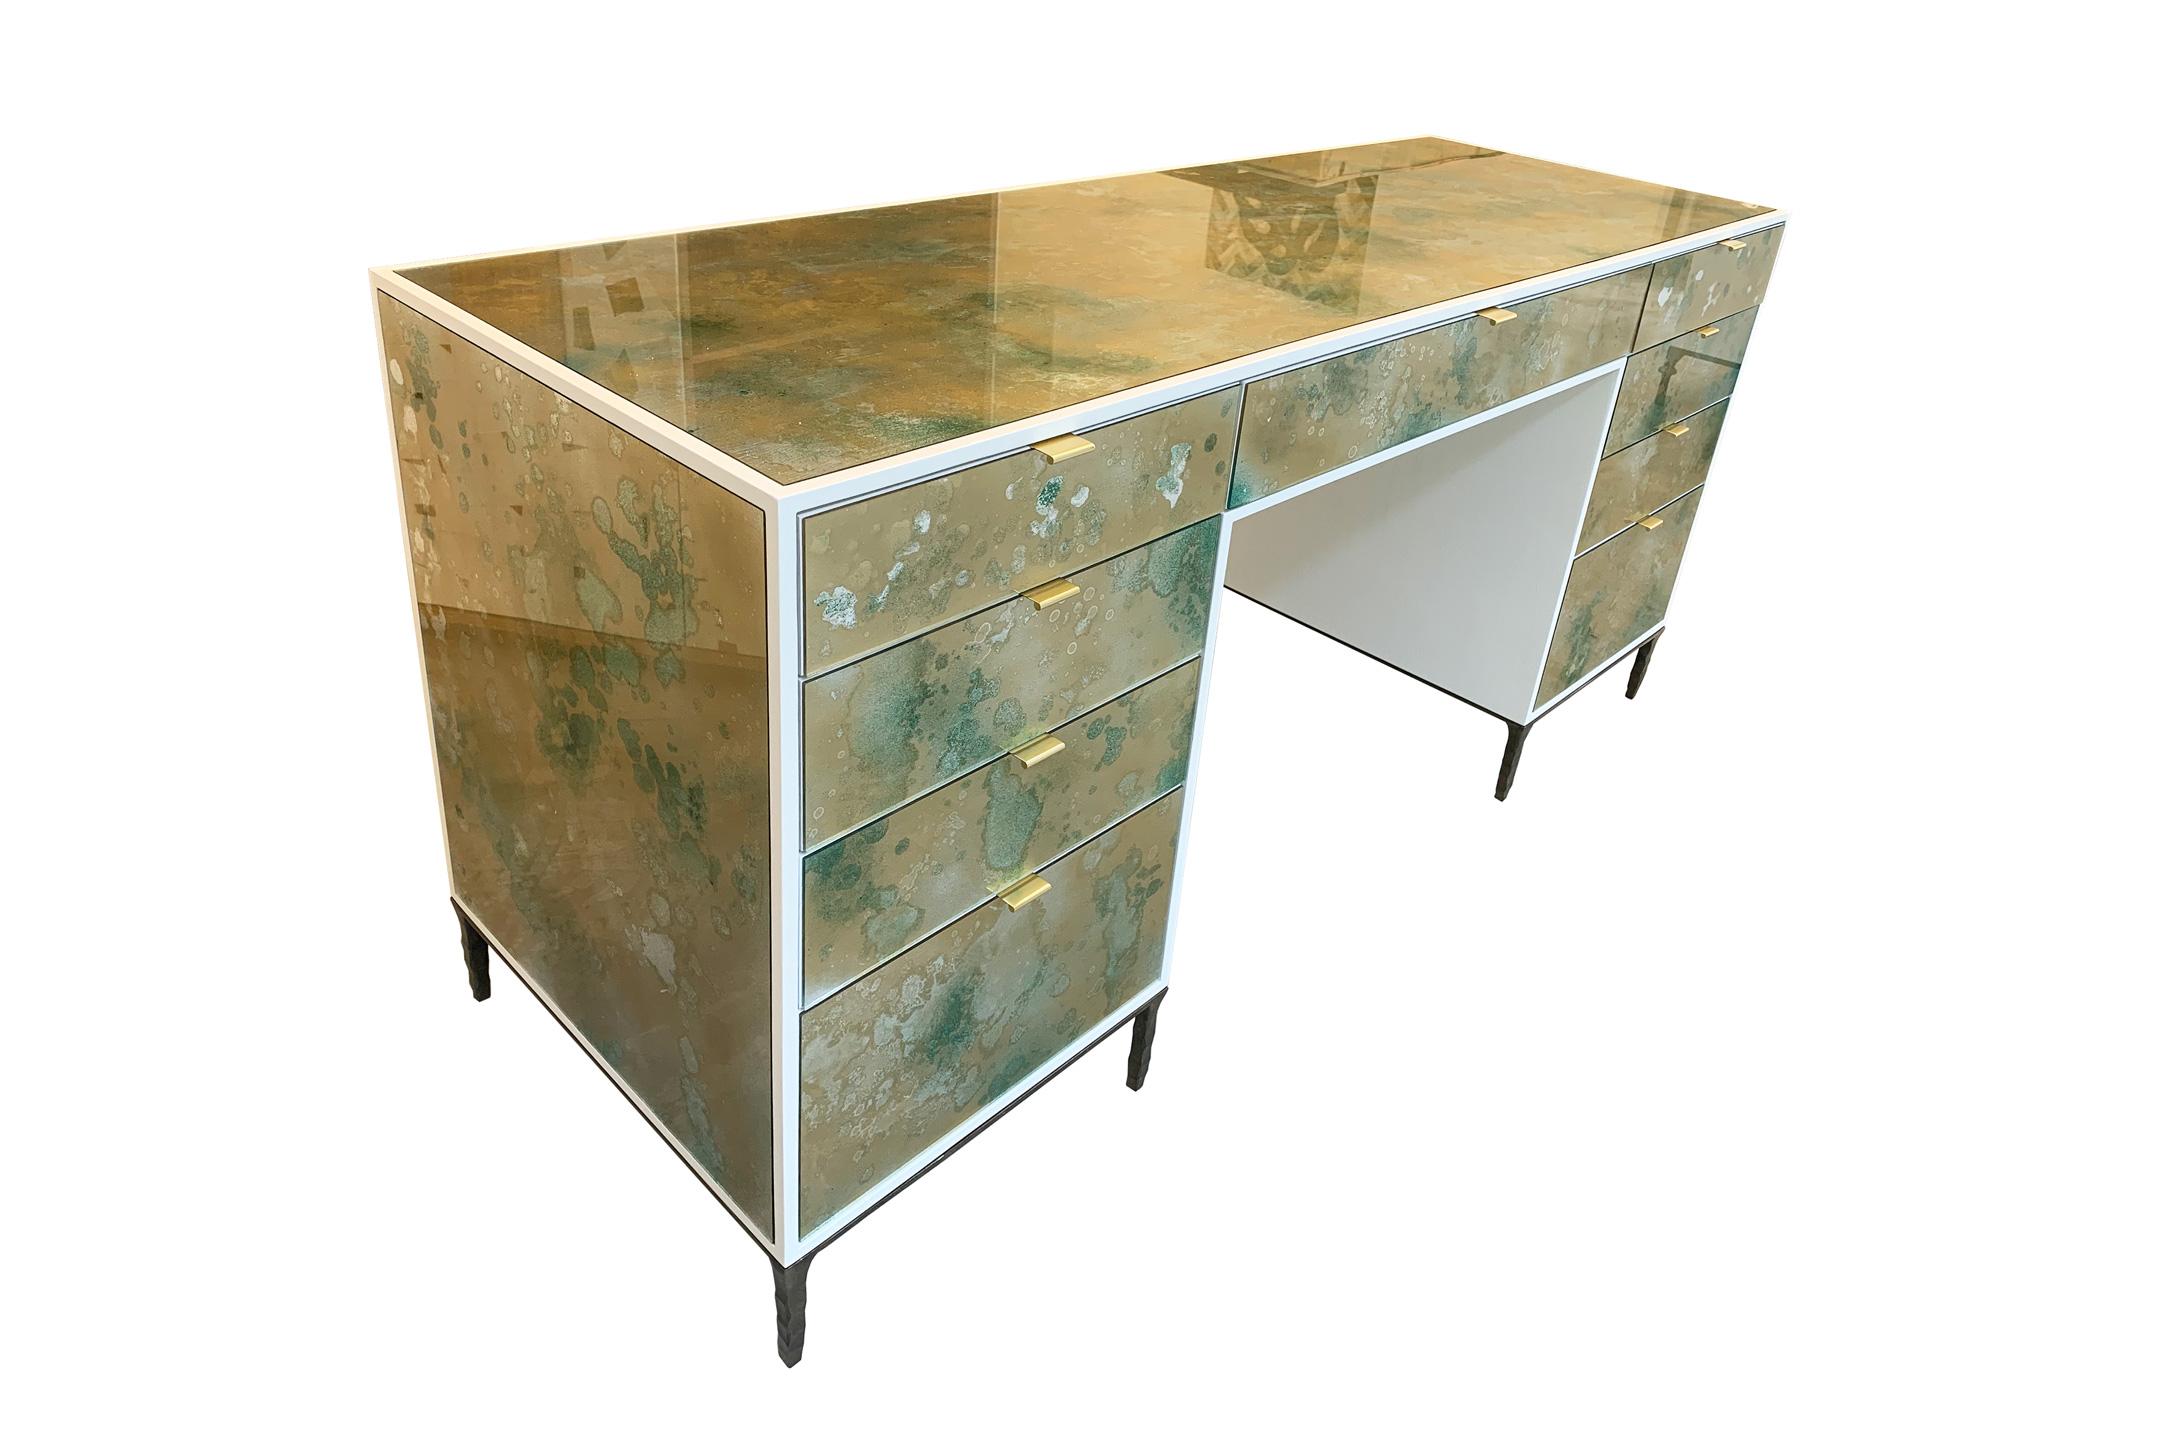 The Mystic Byzantine Gold Green vanity by Ercole Home has a 9-drawer, with ivory wood finish on oak. Hand painted eglomise glass panels are inset on the surface.
There are nine pulls in brushed brass finish.
The hand hammered metal base is in